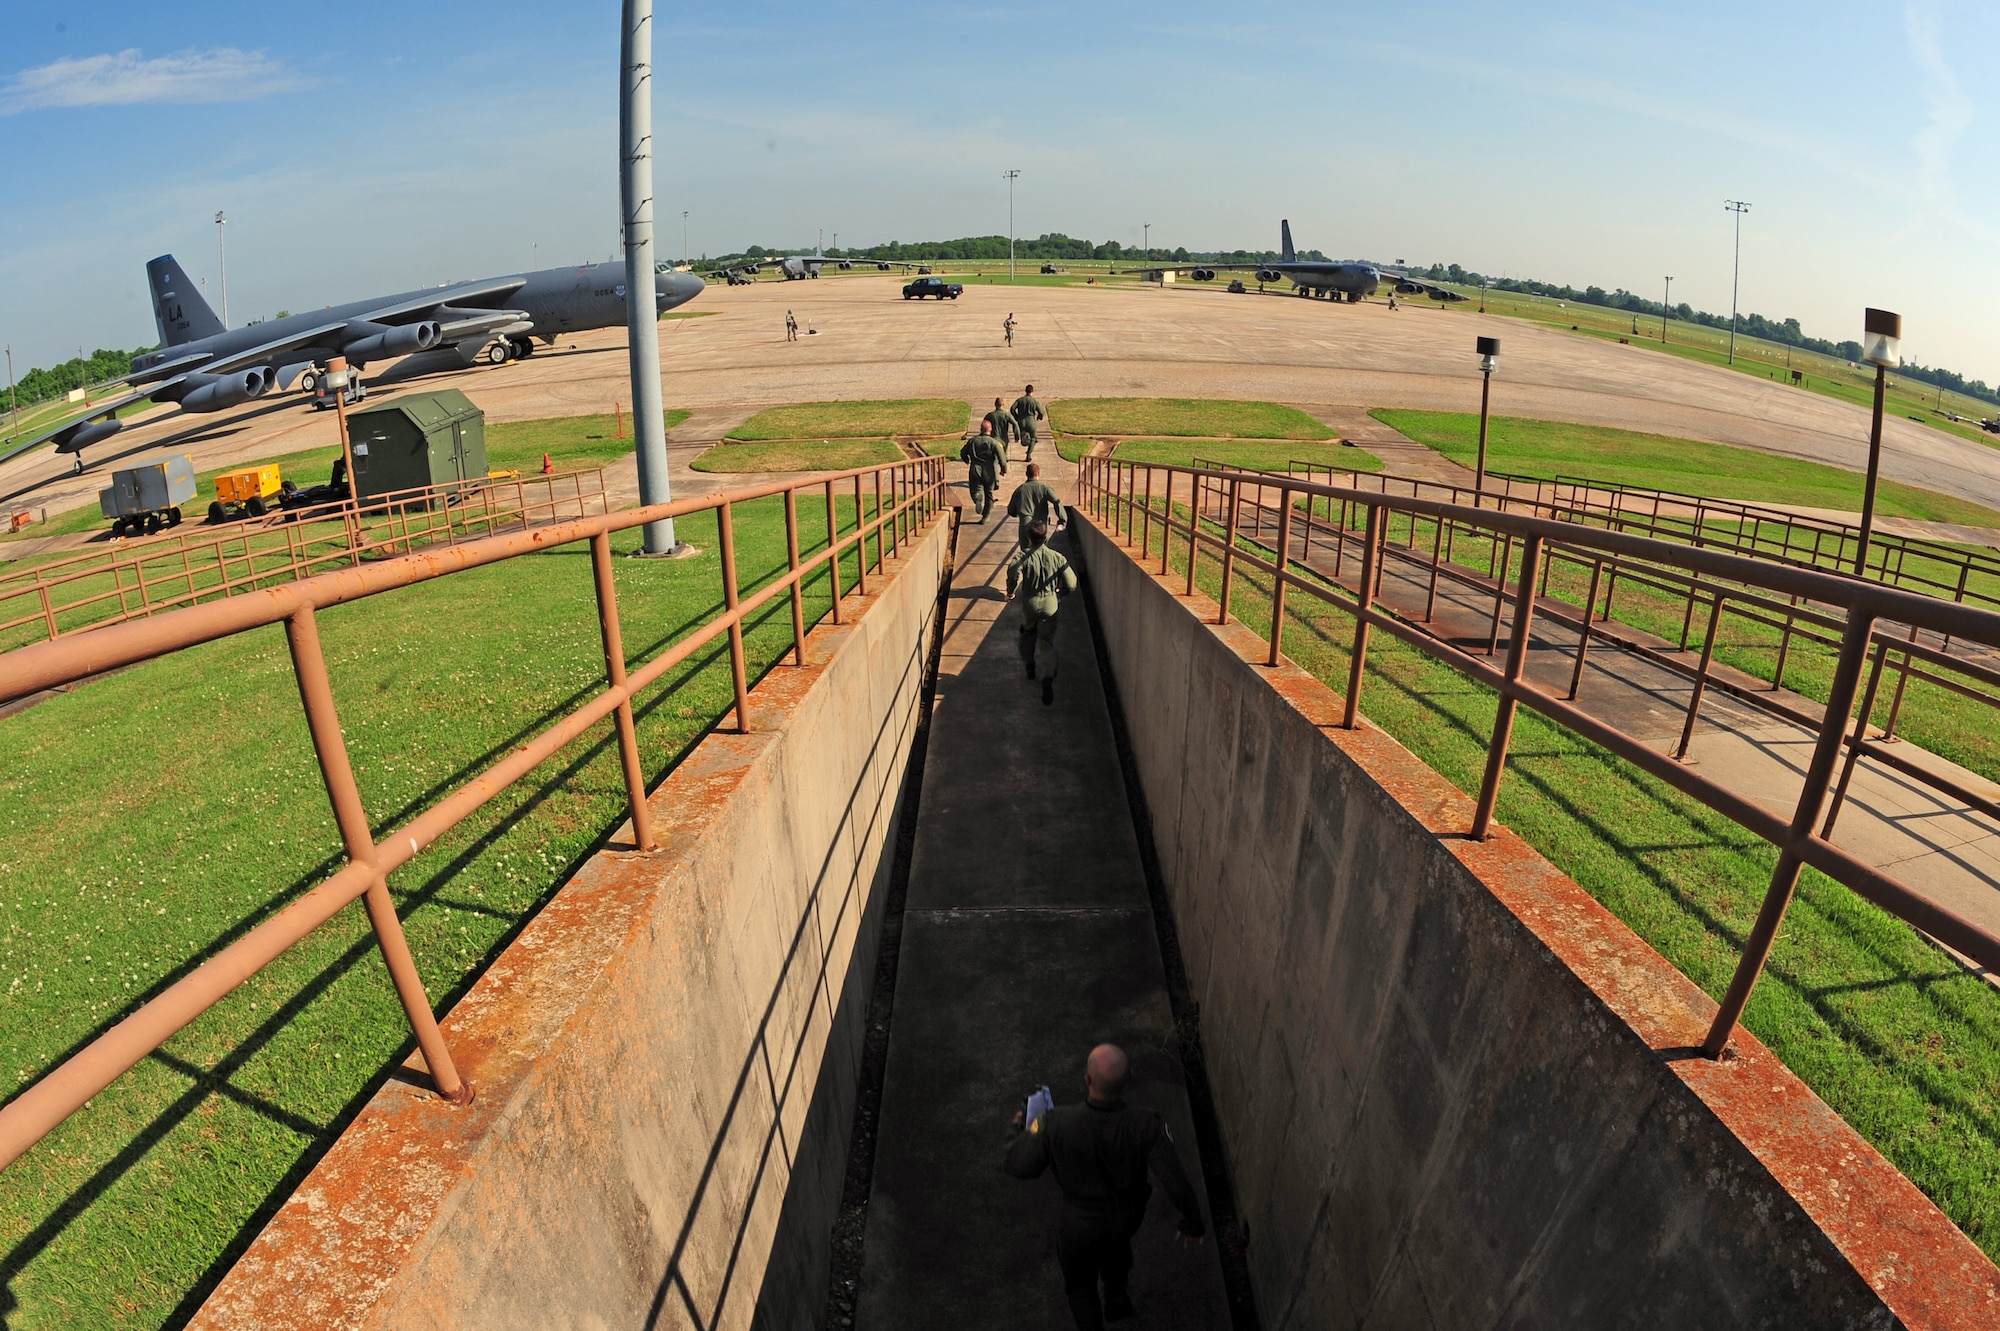 BARKSDALE AIR FORCE BASE, La. – Aircrew from the 96th Bomb Squadron run to a B-52H Stratofortress after the sounding of the Klaxon during a Nuclear Operational Readiness Exercise May 25. The Klaxon is a horn that emits an alert sound that was previously used as hand-powered warning system for military evacuation, and as a submarine dive alarm. This warning is currently used electronically on trains, ships and aircrew who are on alert and may need to take-off at a moment’s notice. (U.S. Air Force photo by Senior Airman Joanna M. Kresge)